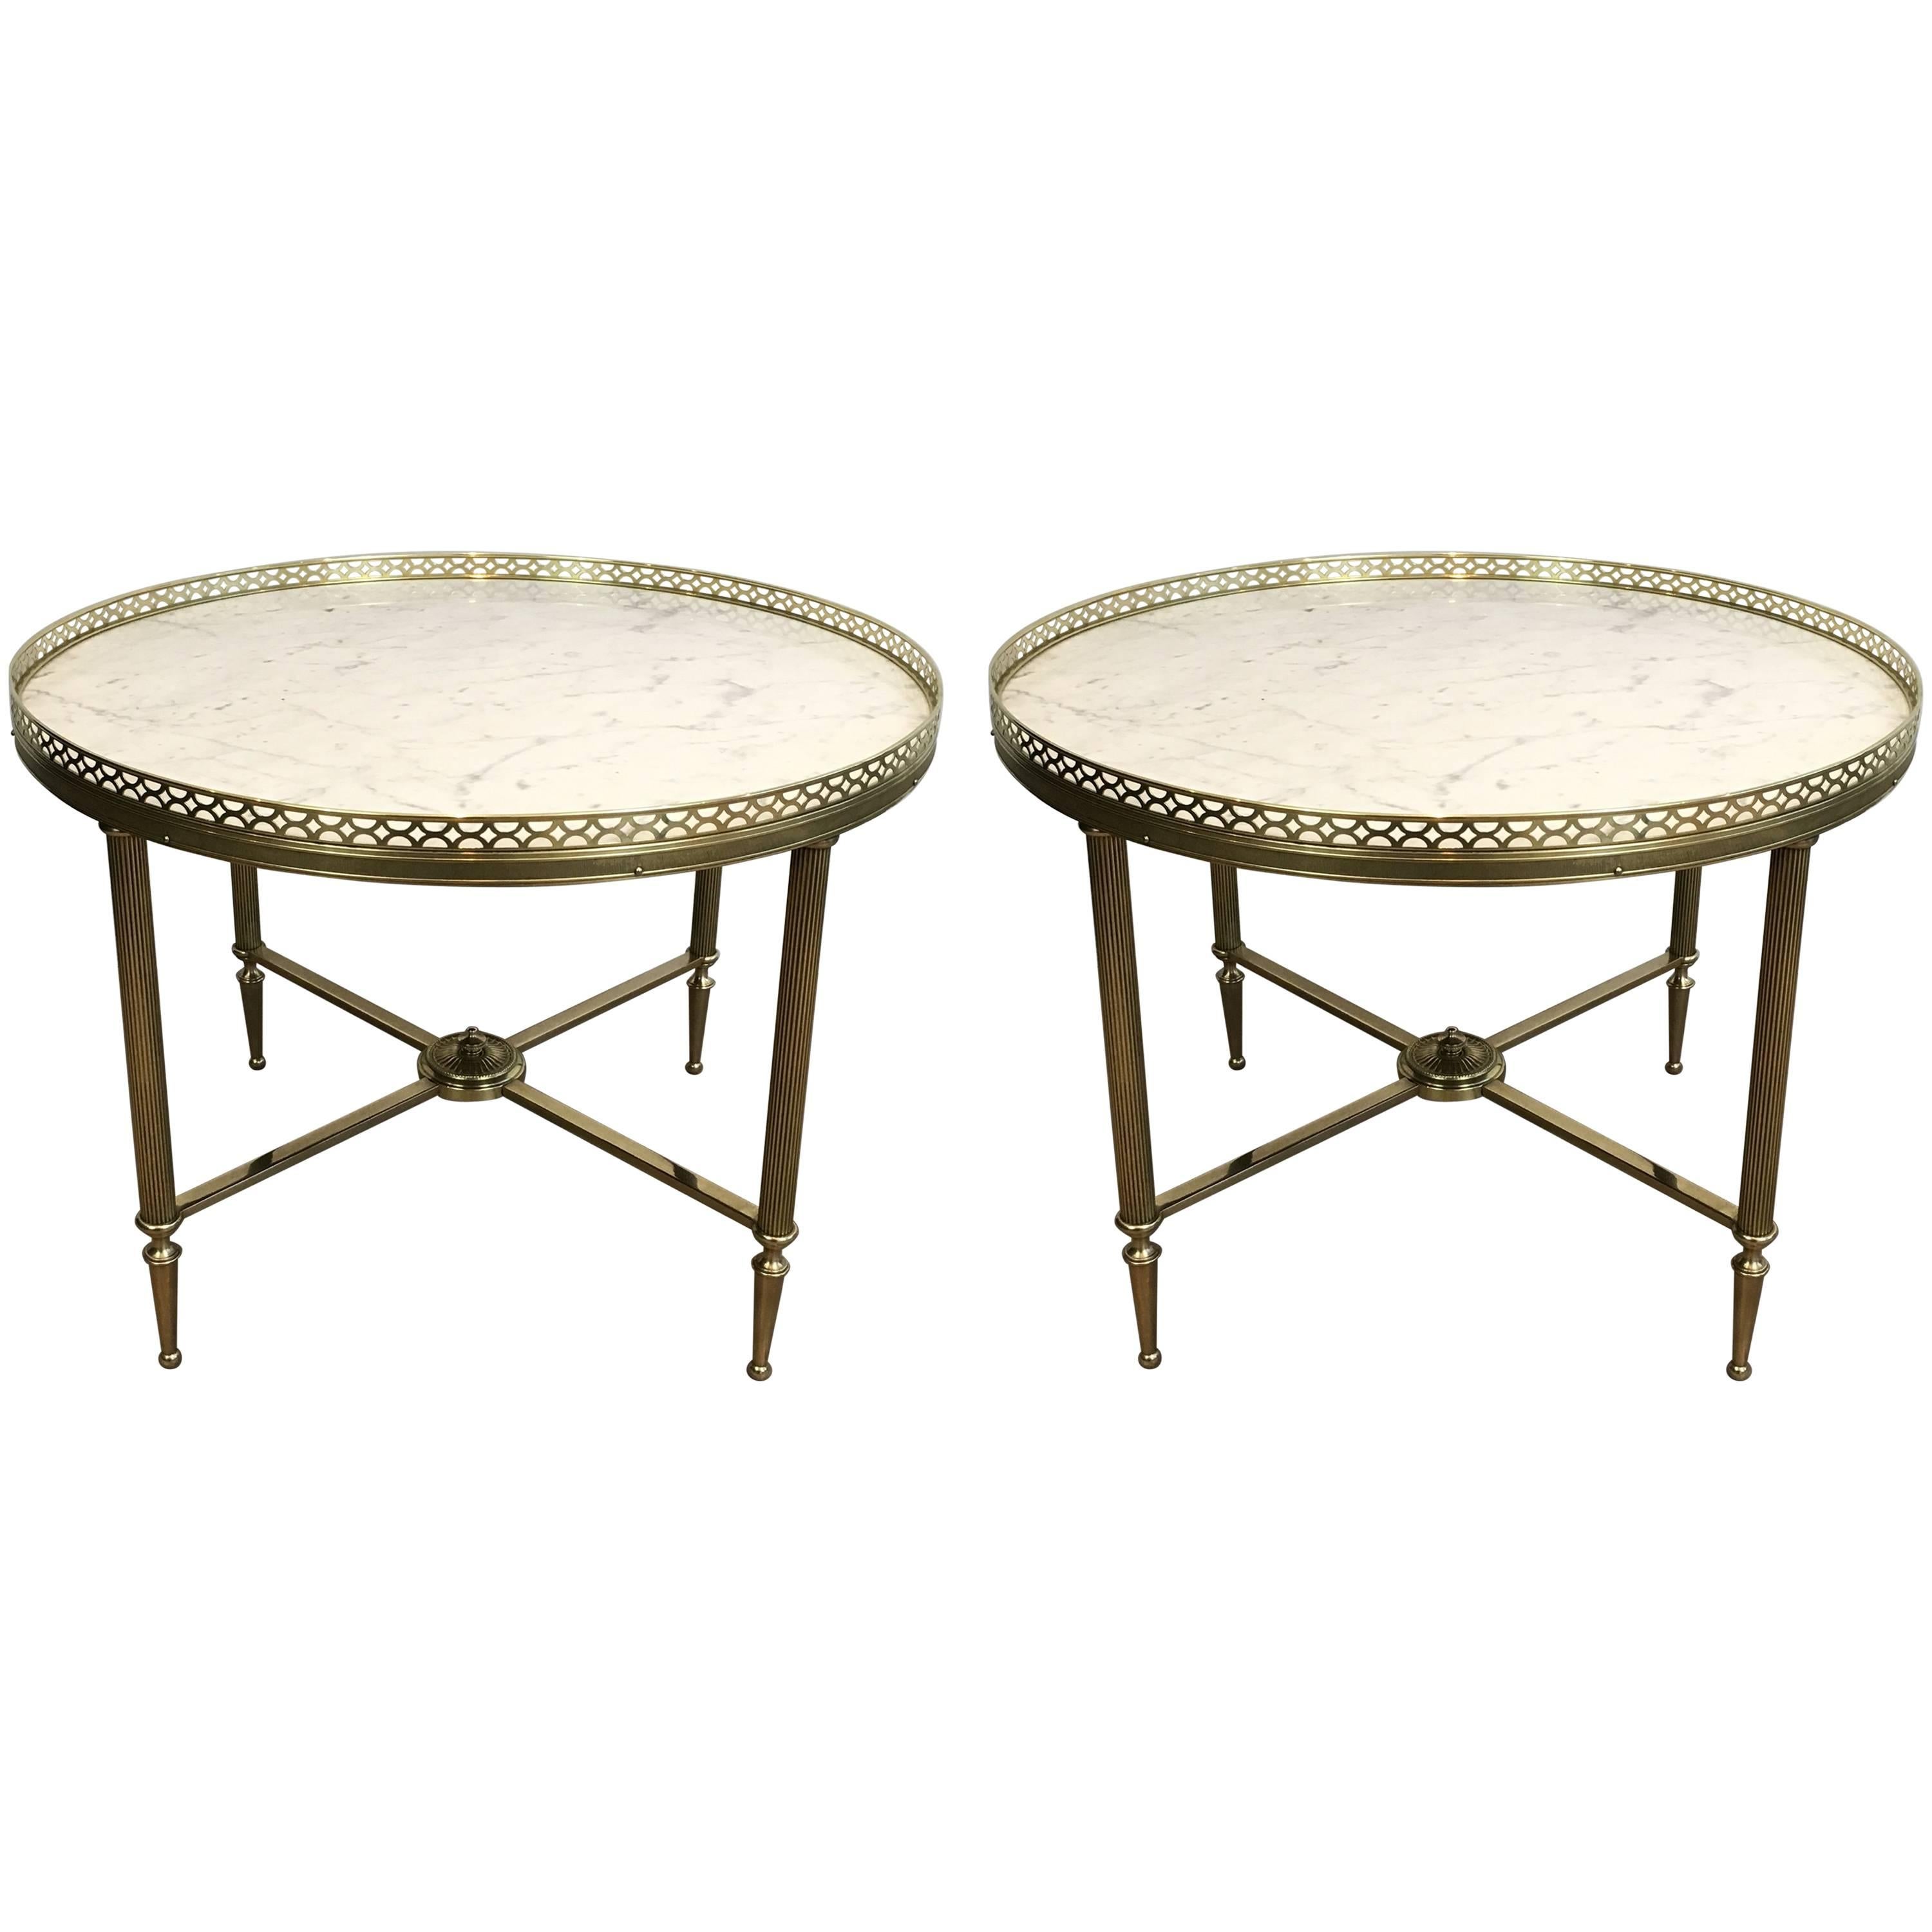 Pair of Brass End Tables with White Marble Tops by Maison Jansen